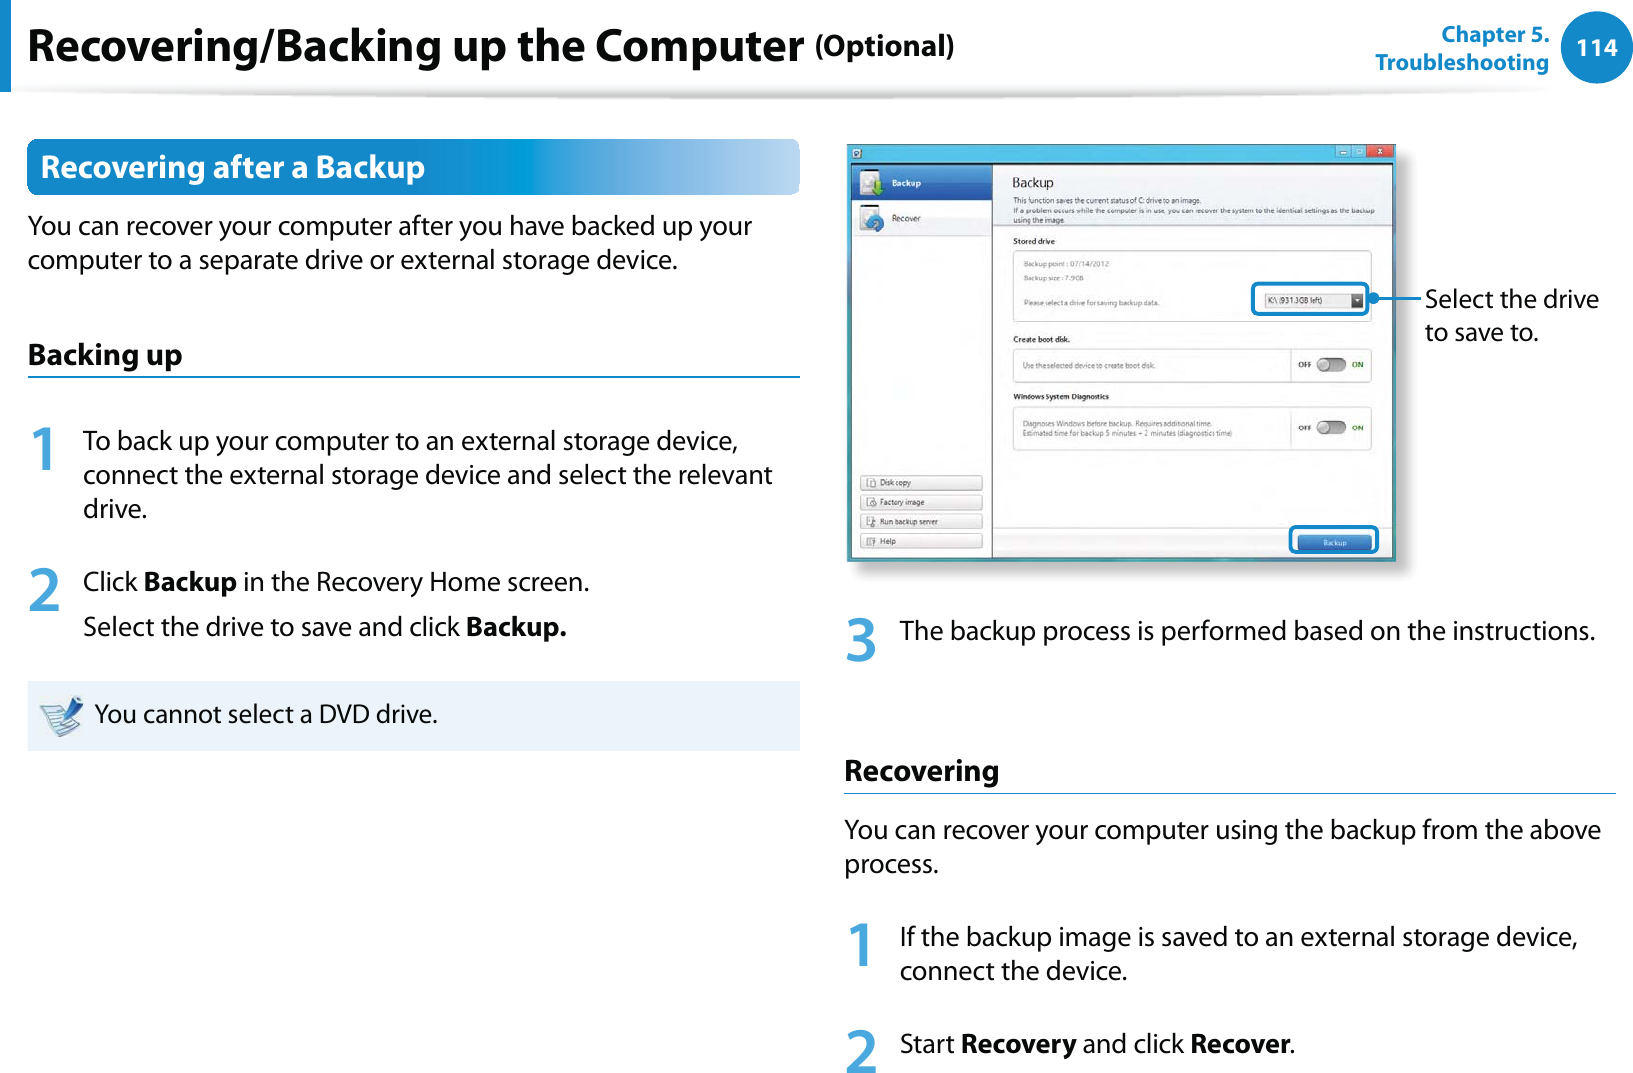 114Chapter 5.   TroubleshootingRecovering after a BackupYou can recover your computer after you have backed up your computer to a separate drive or external storage device.Backing up1  To back up your computer to an external storage device, connect the external storage device and select the relevant drive. 2 Click Backup in the Recovery Home screen.Select the drive to save and click Backup.  You cannot select a DVD drive.Select the drive to save to.3  The backup process is performed based on the instructions.RecoveringYou can recover your computer using the backup from the above process.1  If the backup image is saved to an external storage device, connect the device.2 Start Recovery and click Recover.Recovering/Backing up the Computer (Optional)